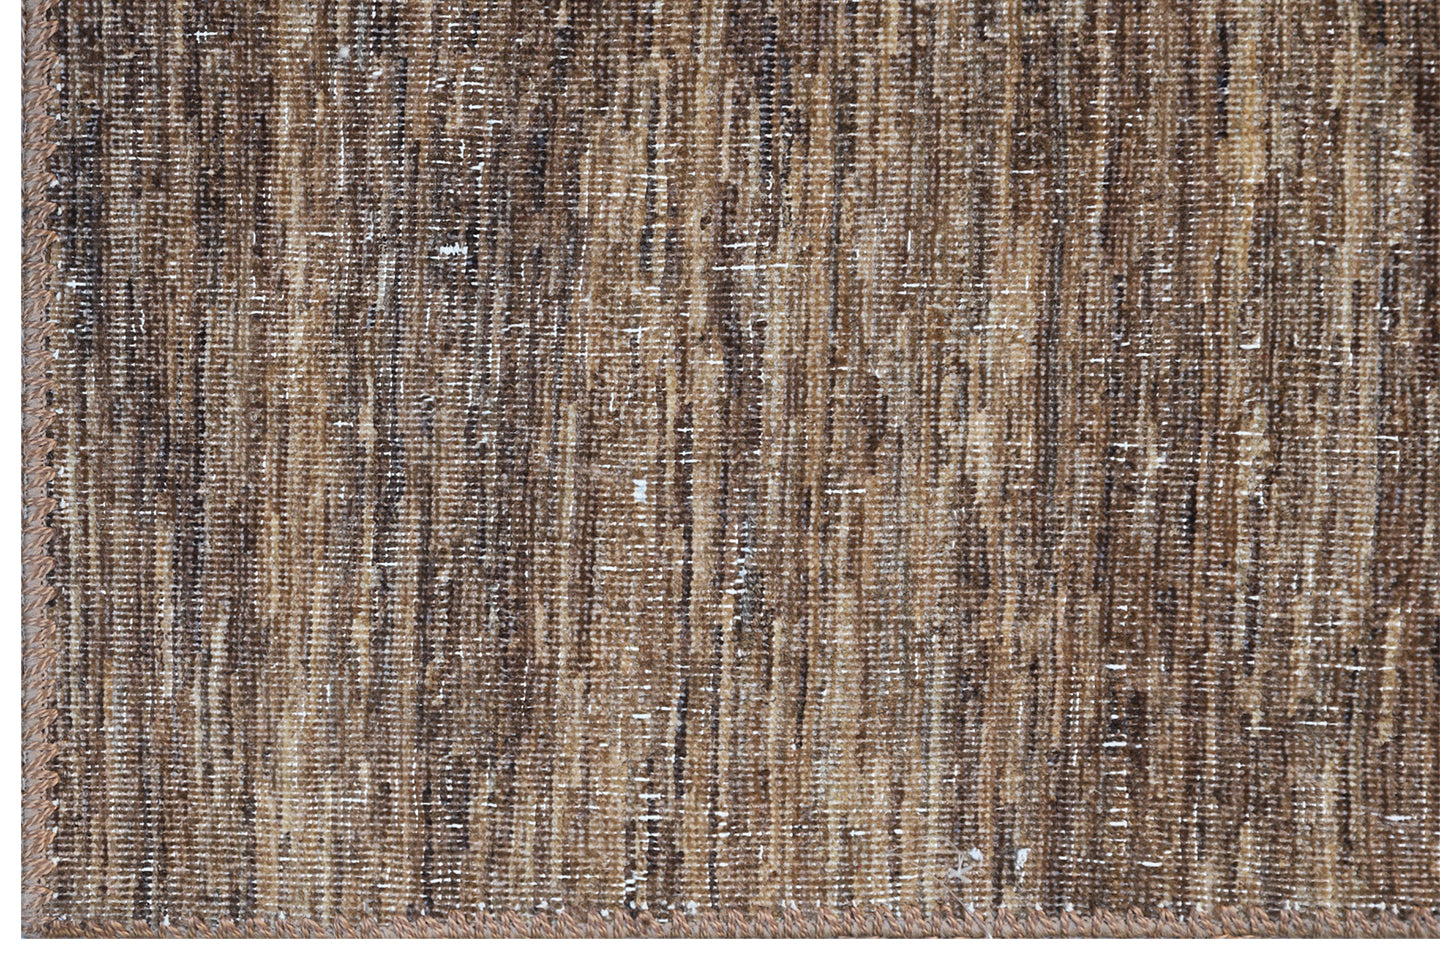 10'x14' Brown Patchwork Overdyed Wool Area Rug